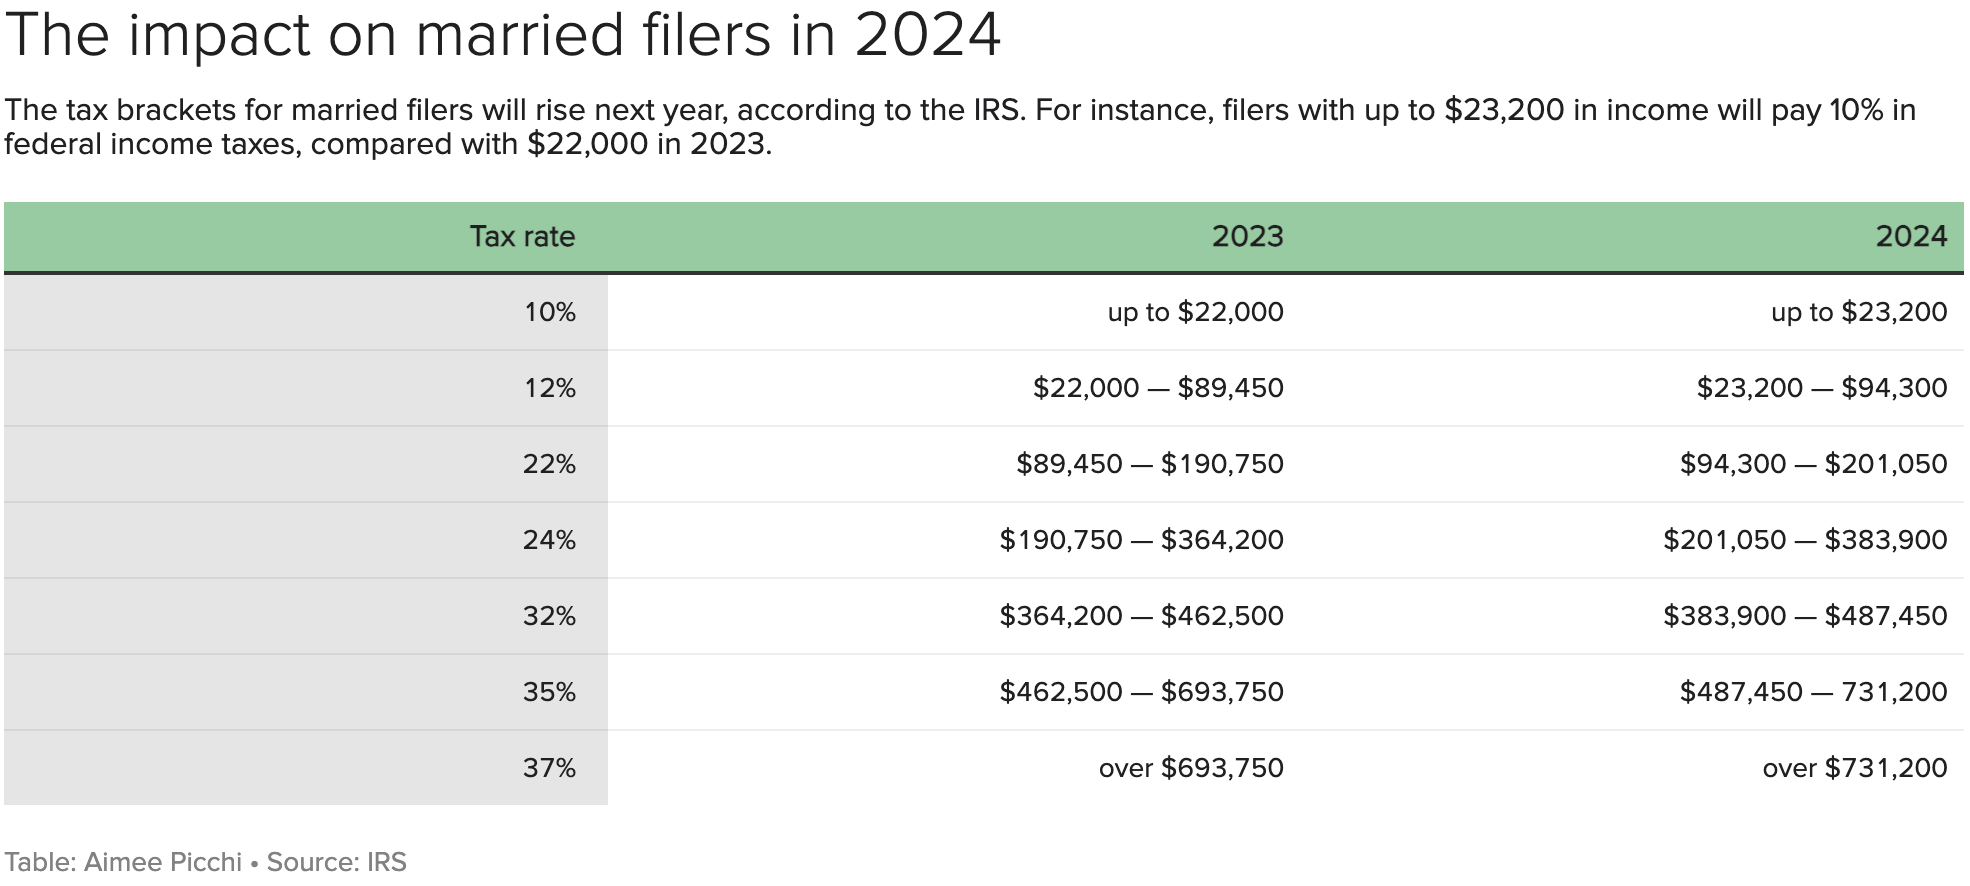 The impact on married filers in 2024.